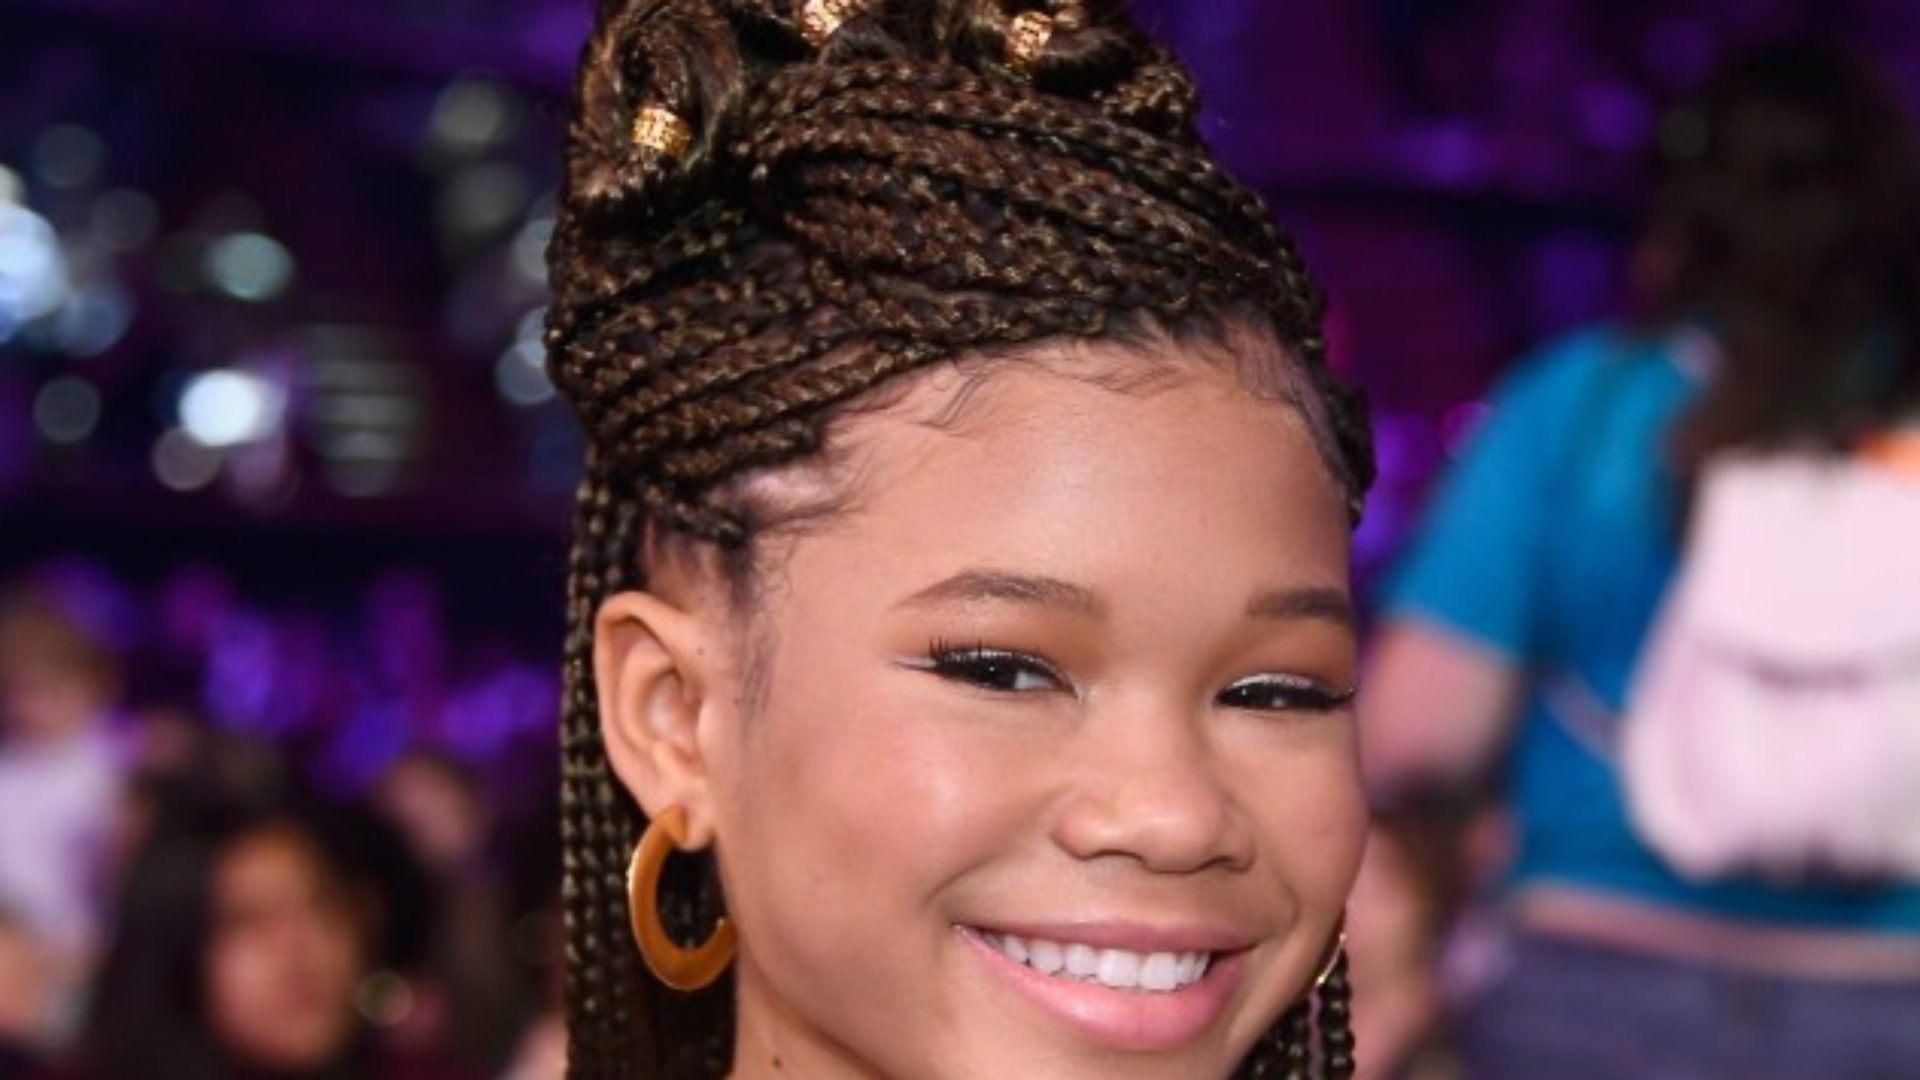 5 Cool Ways To Style Your Box Braids For Holiday Parties